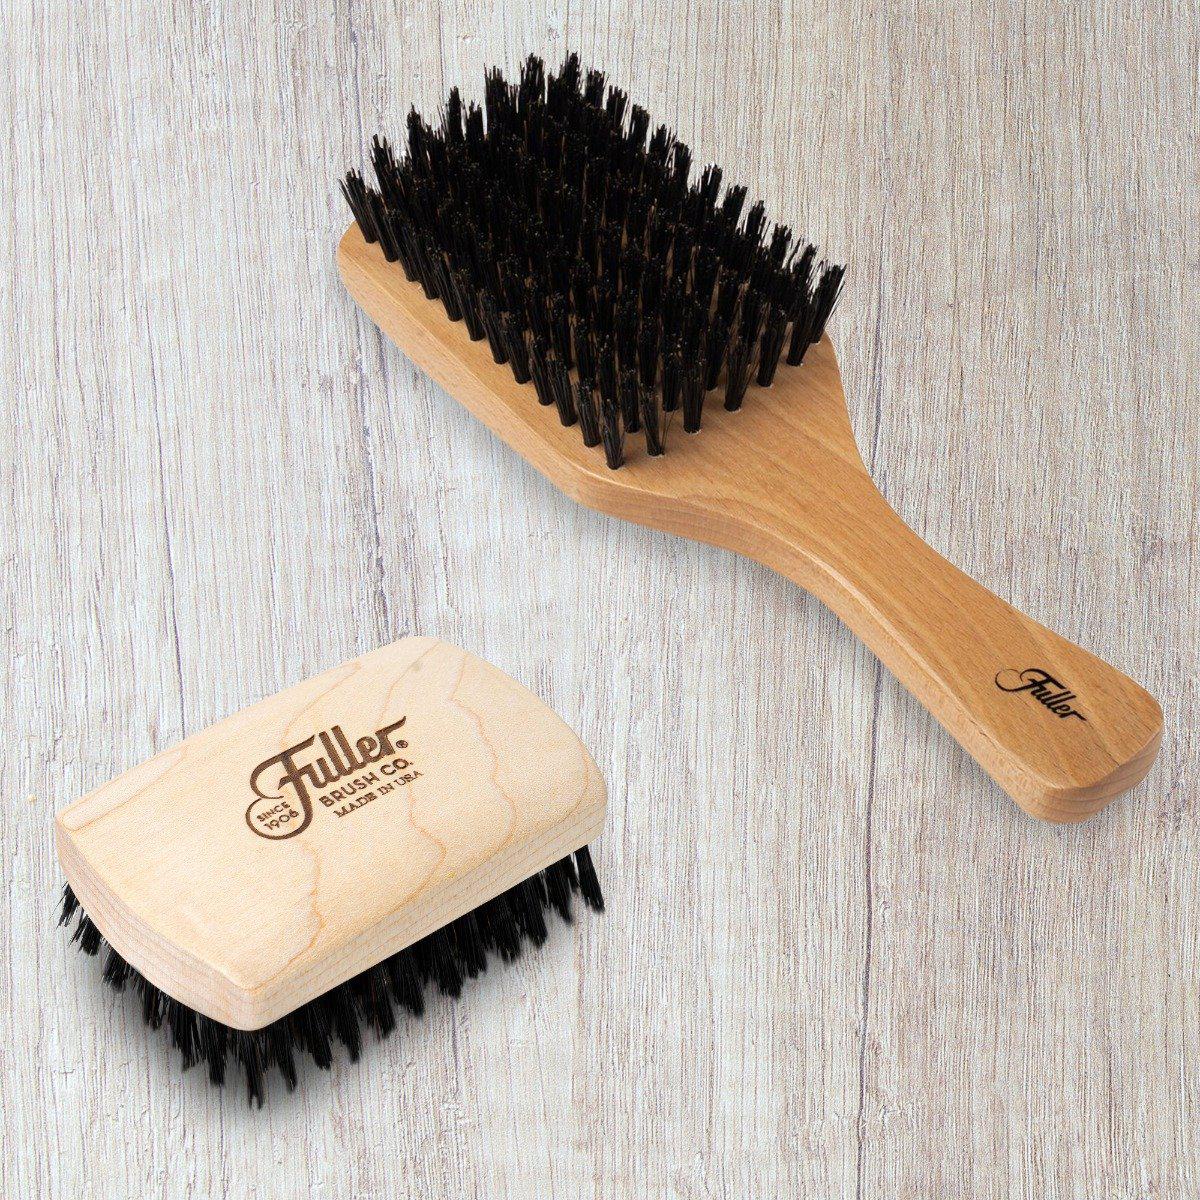 Hand-crafted Hairbrush Gift Set - Includes Beech Wood Club Hairbrush and Pocket-size Hair & Beard Brush-Hair Brushes-Fuller Brush Company